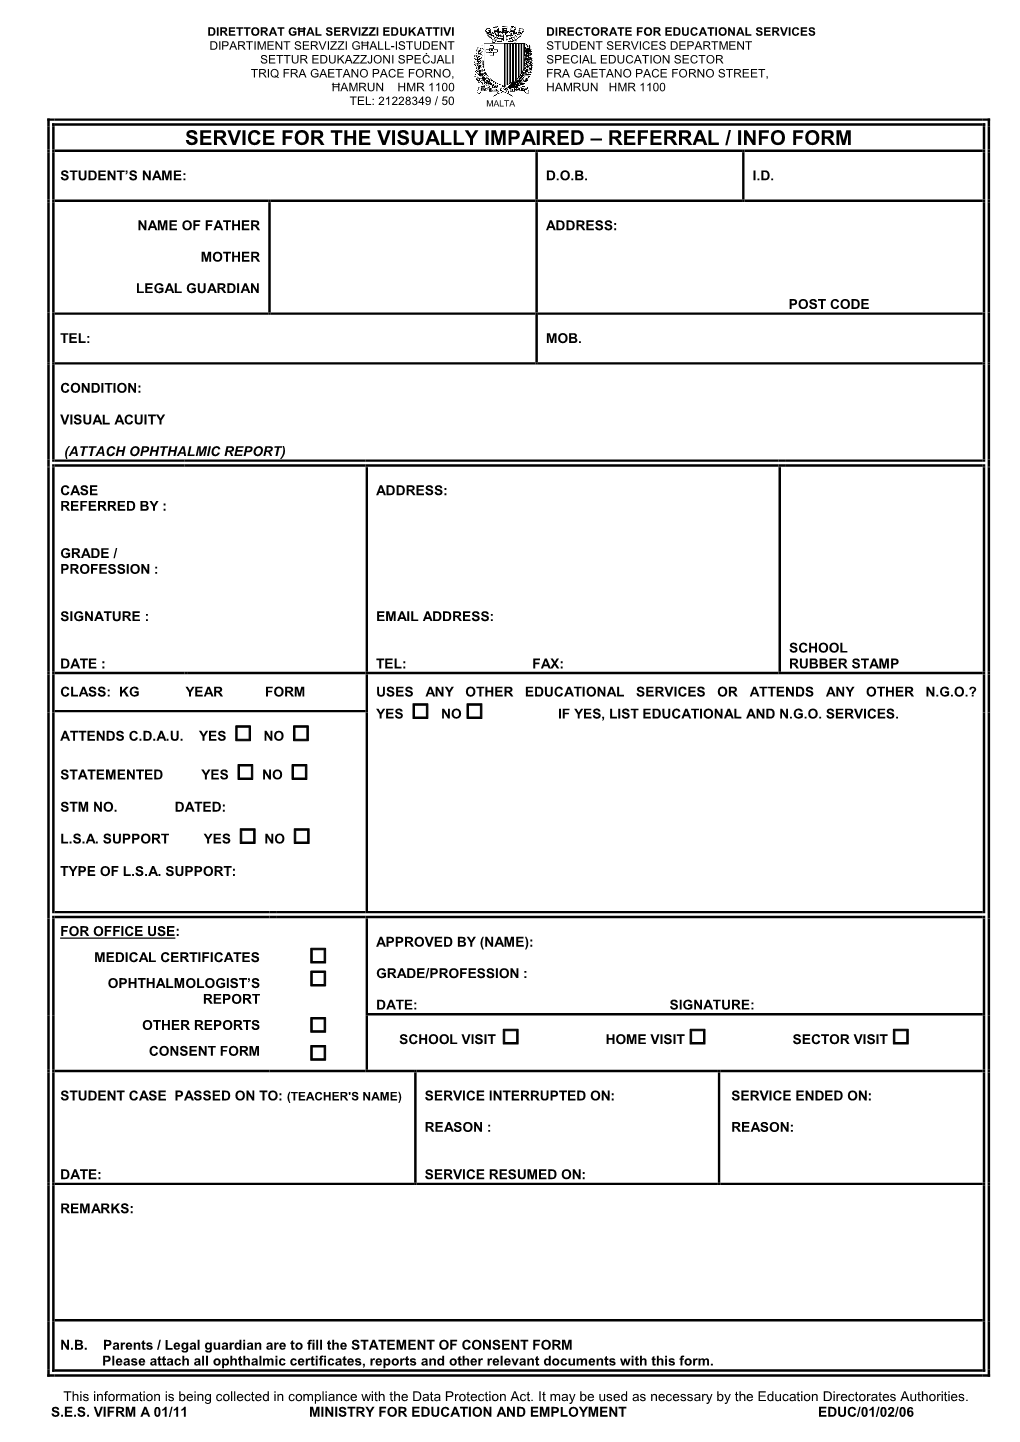 Referral Form and Parental Consent Form